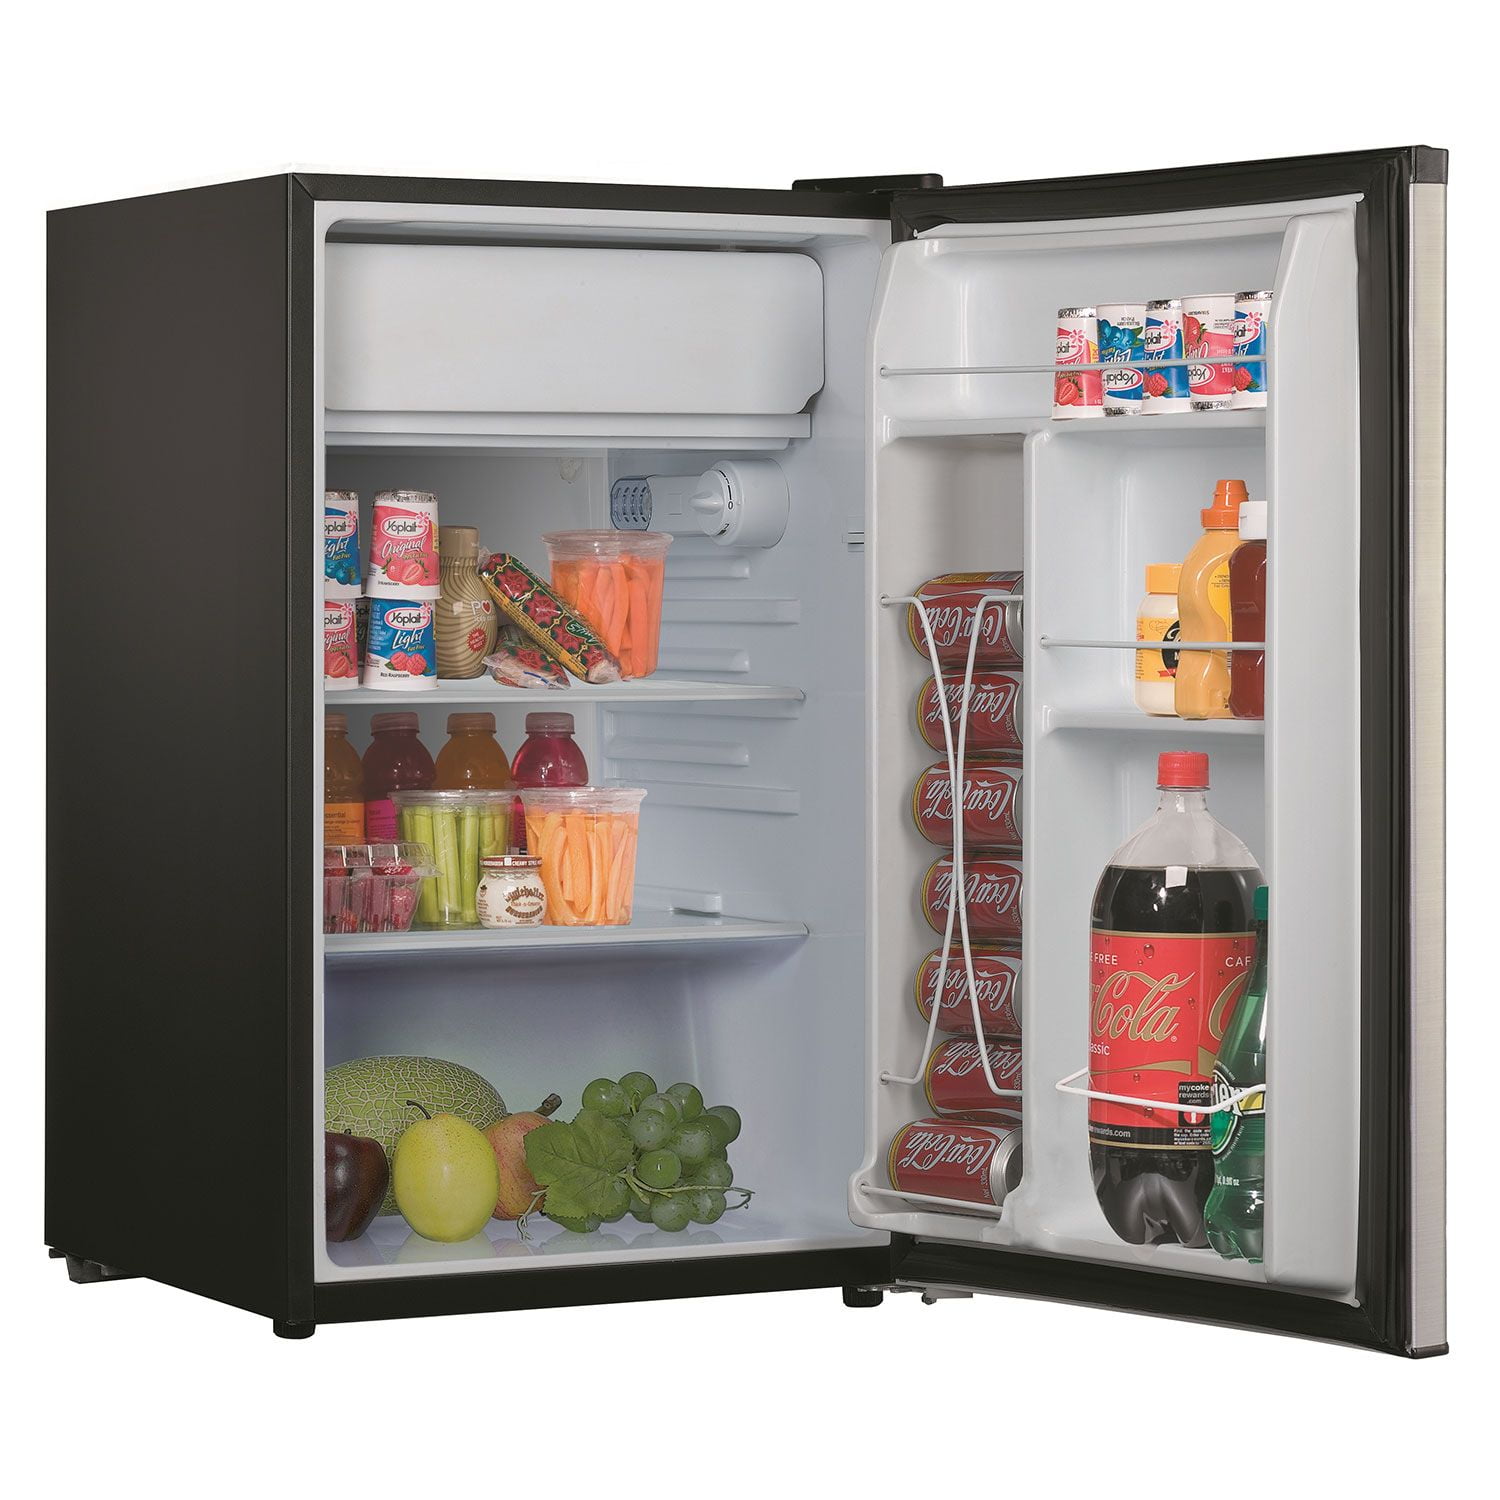 Get a Whirlpool mini fridge on sale for less than $85 at Target